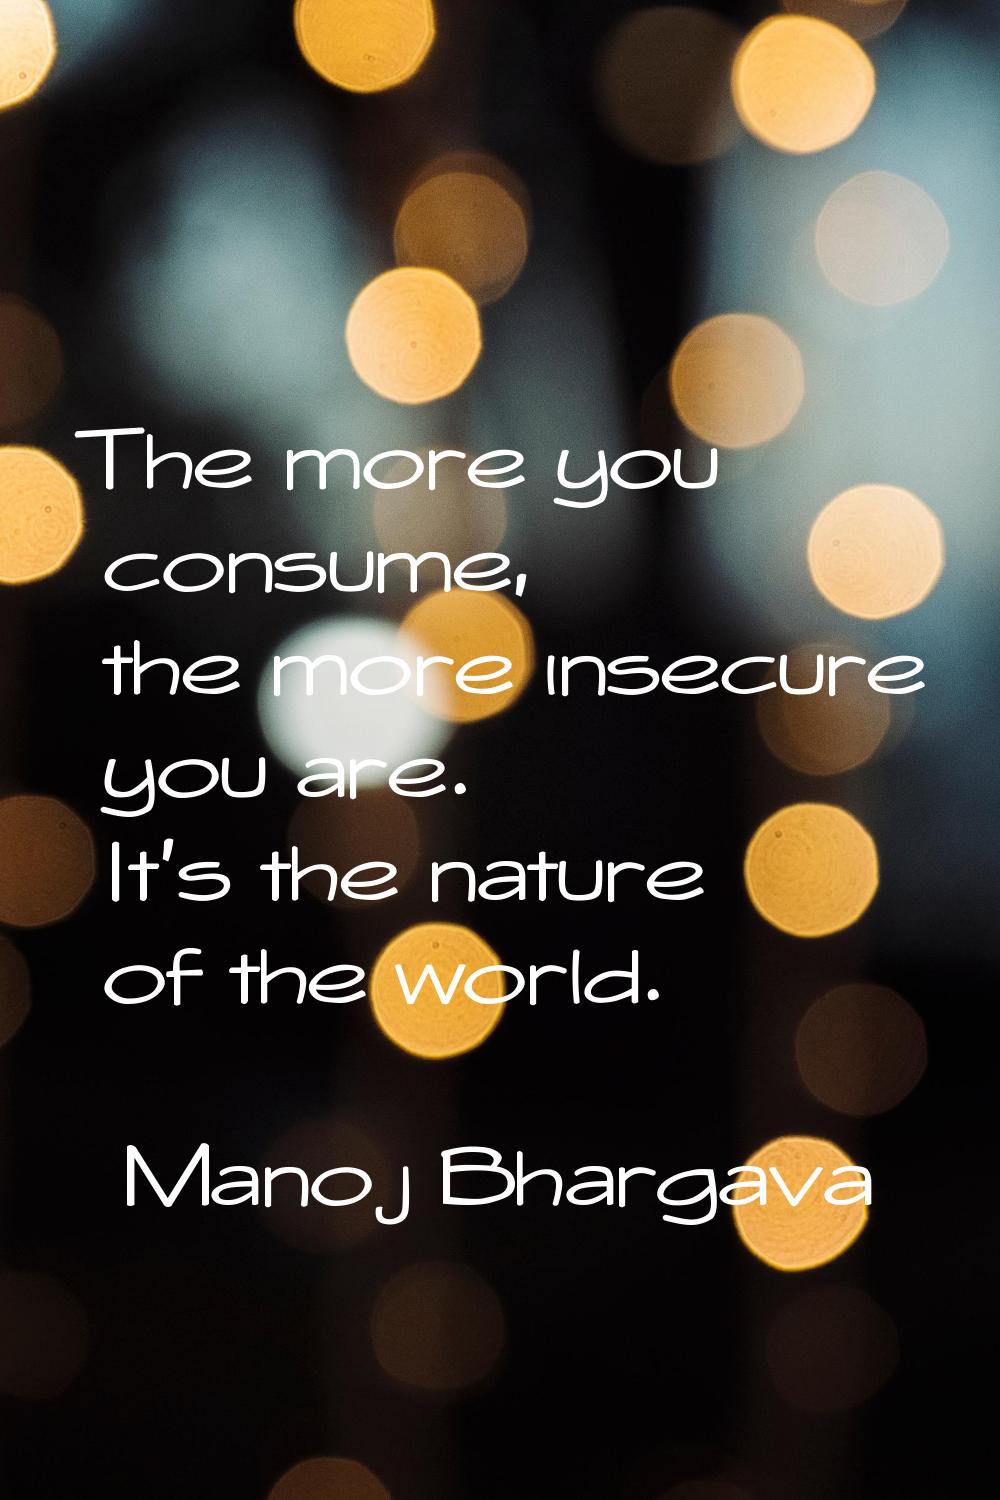 The more you consume, the more insecure you are. It's the nature of the world.